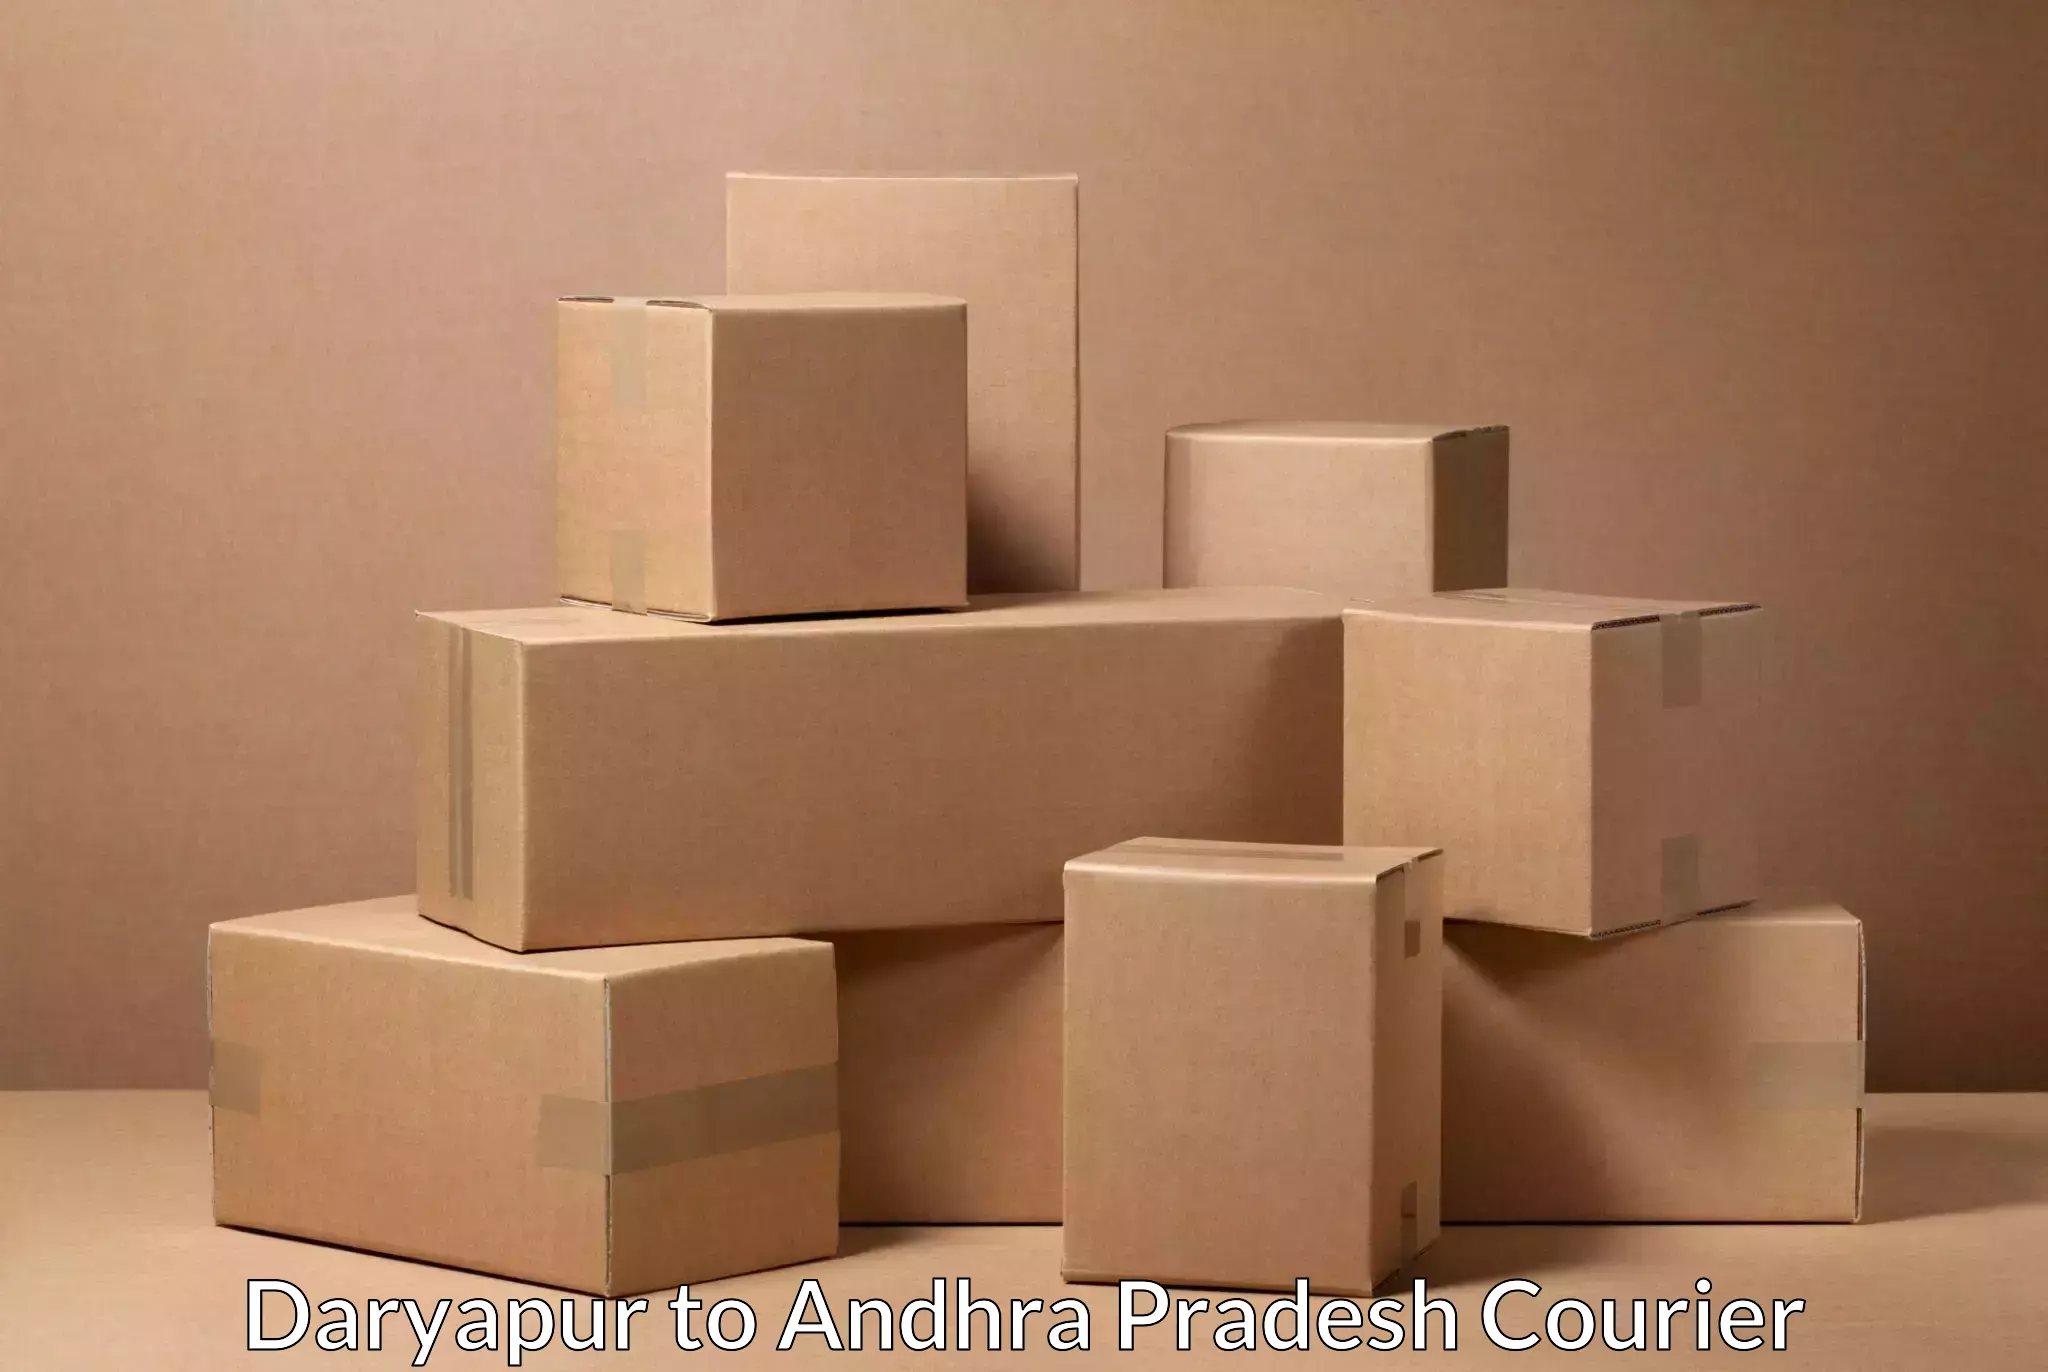 Global courier networks Daryapur to Andhra Pradesh